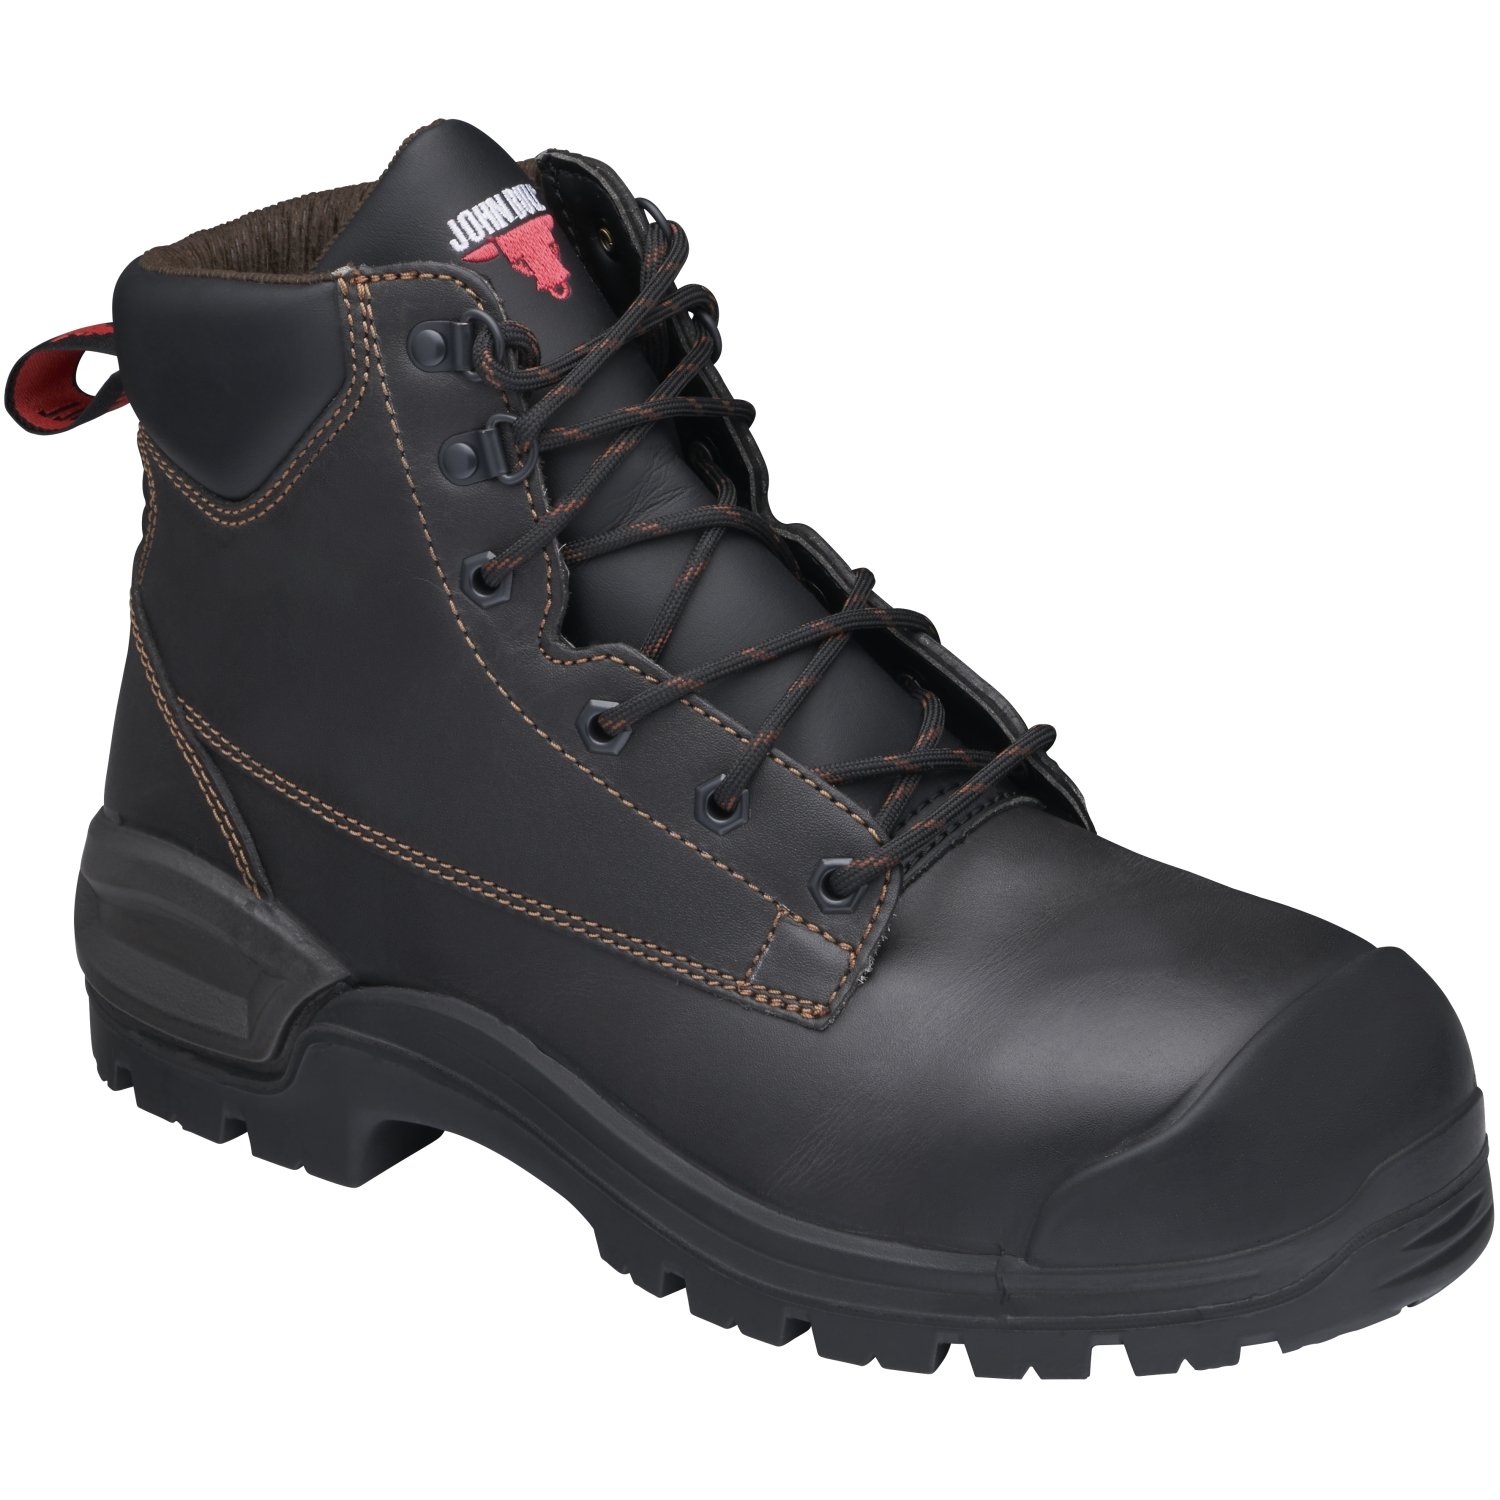 John Bull Himalaya 2.0 Lace Up Safety Boot With Scuff Cap Claret